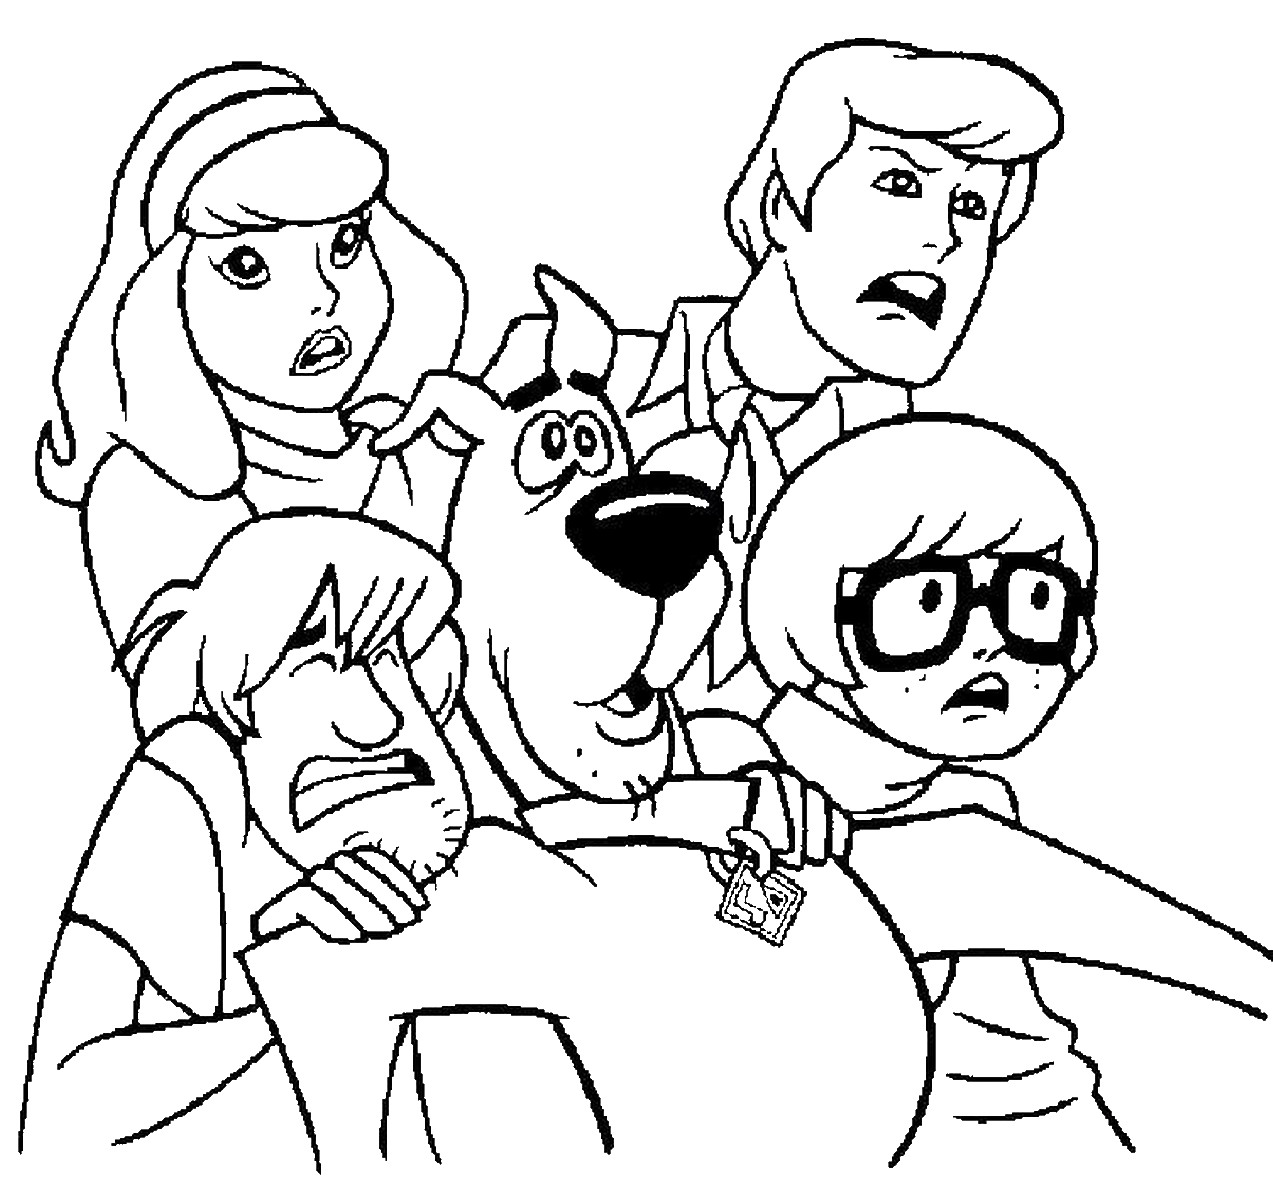 Free Printable Scooby Doo Coloring Page For Kids | Coloring Pages